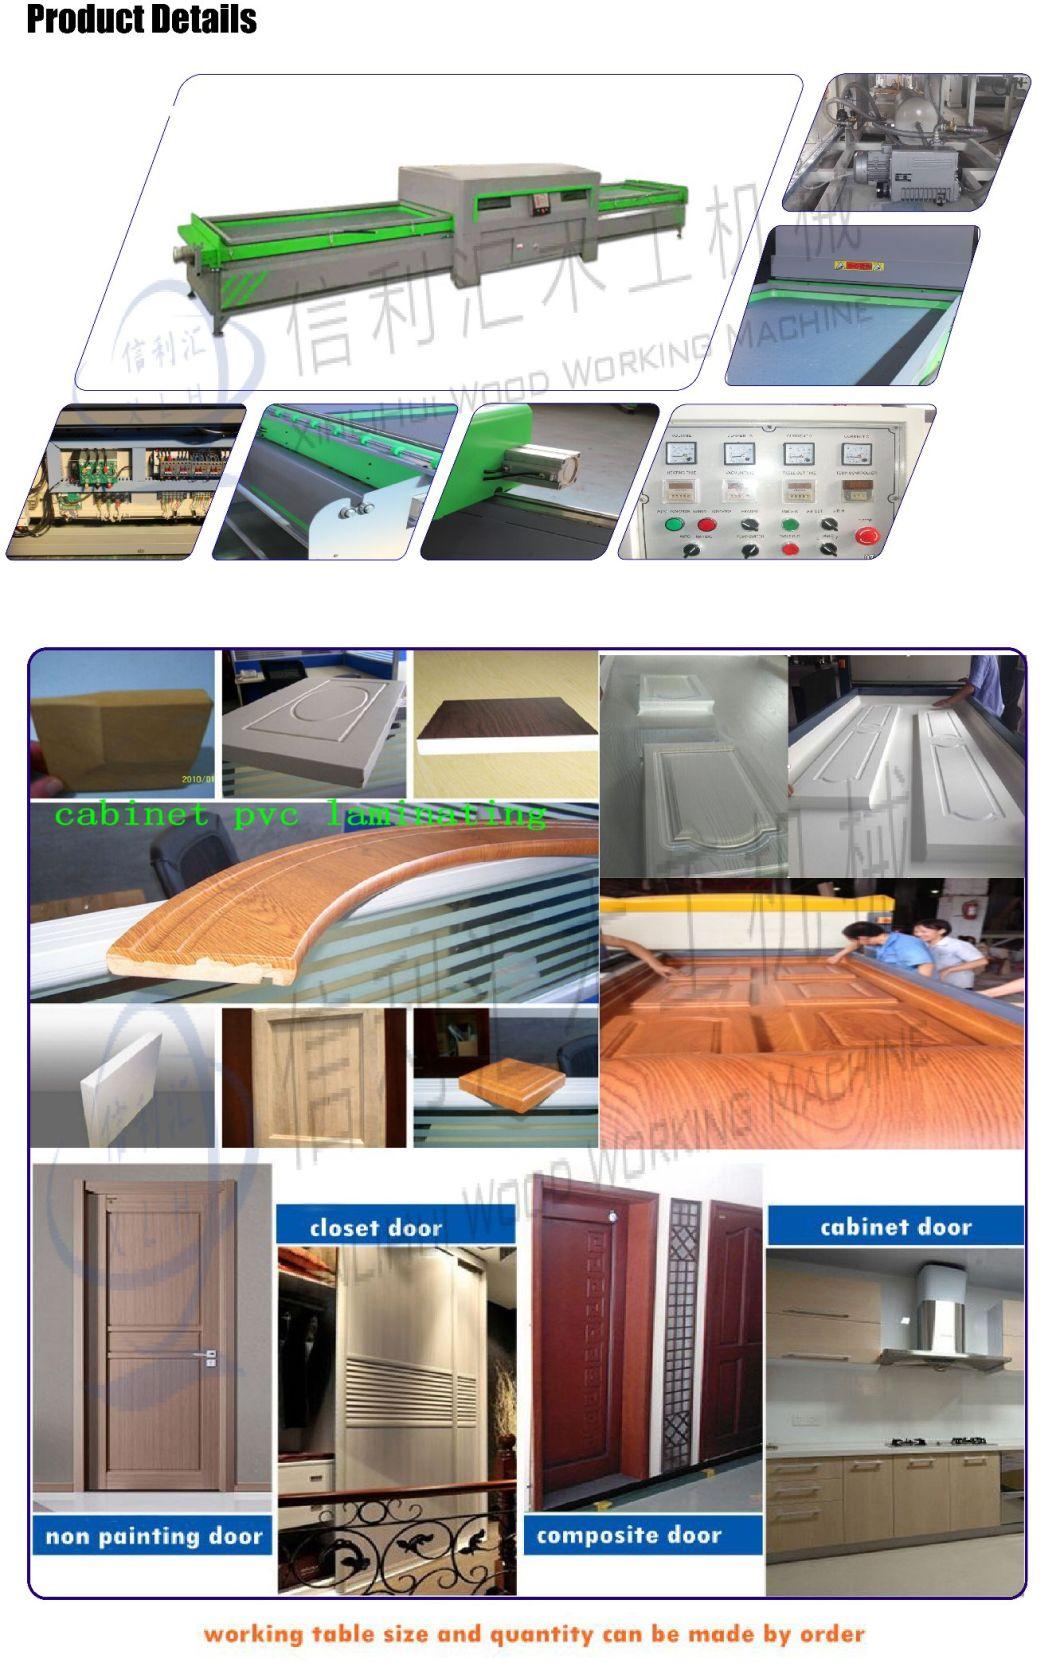 Vacuum Pressure, Vacuum Machine, Laminated Board Furniture Business We Will Need to Cut Pre-Surfaced Laminated Chip Board Sheets in Kenya and Zimbabwe